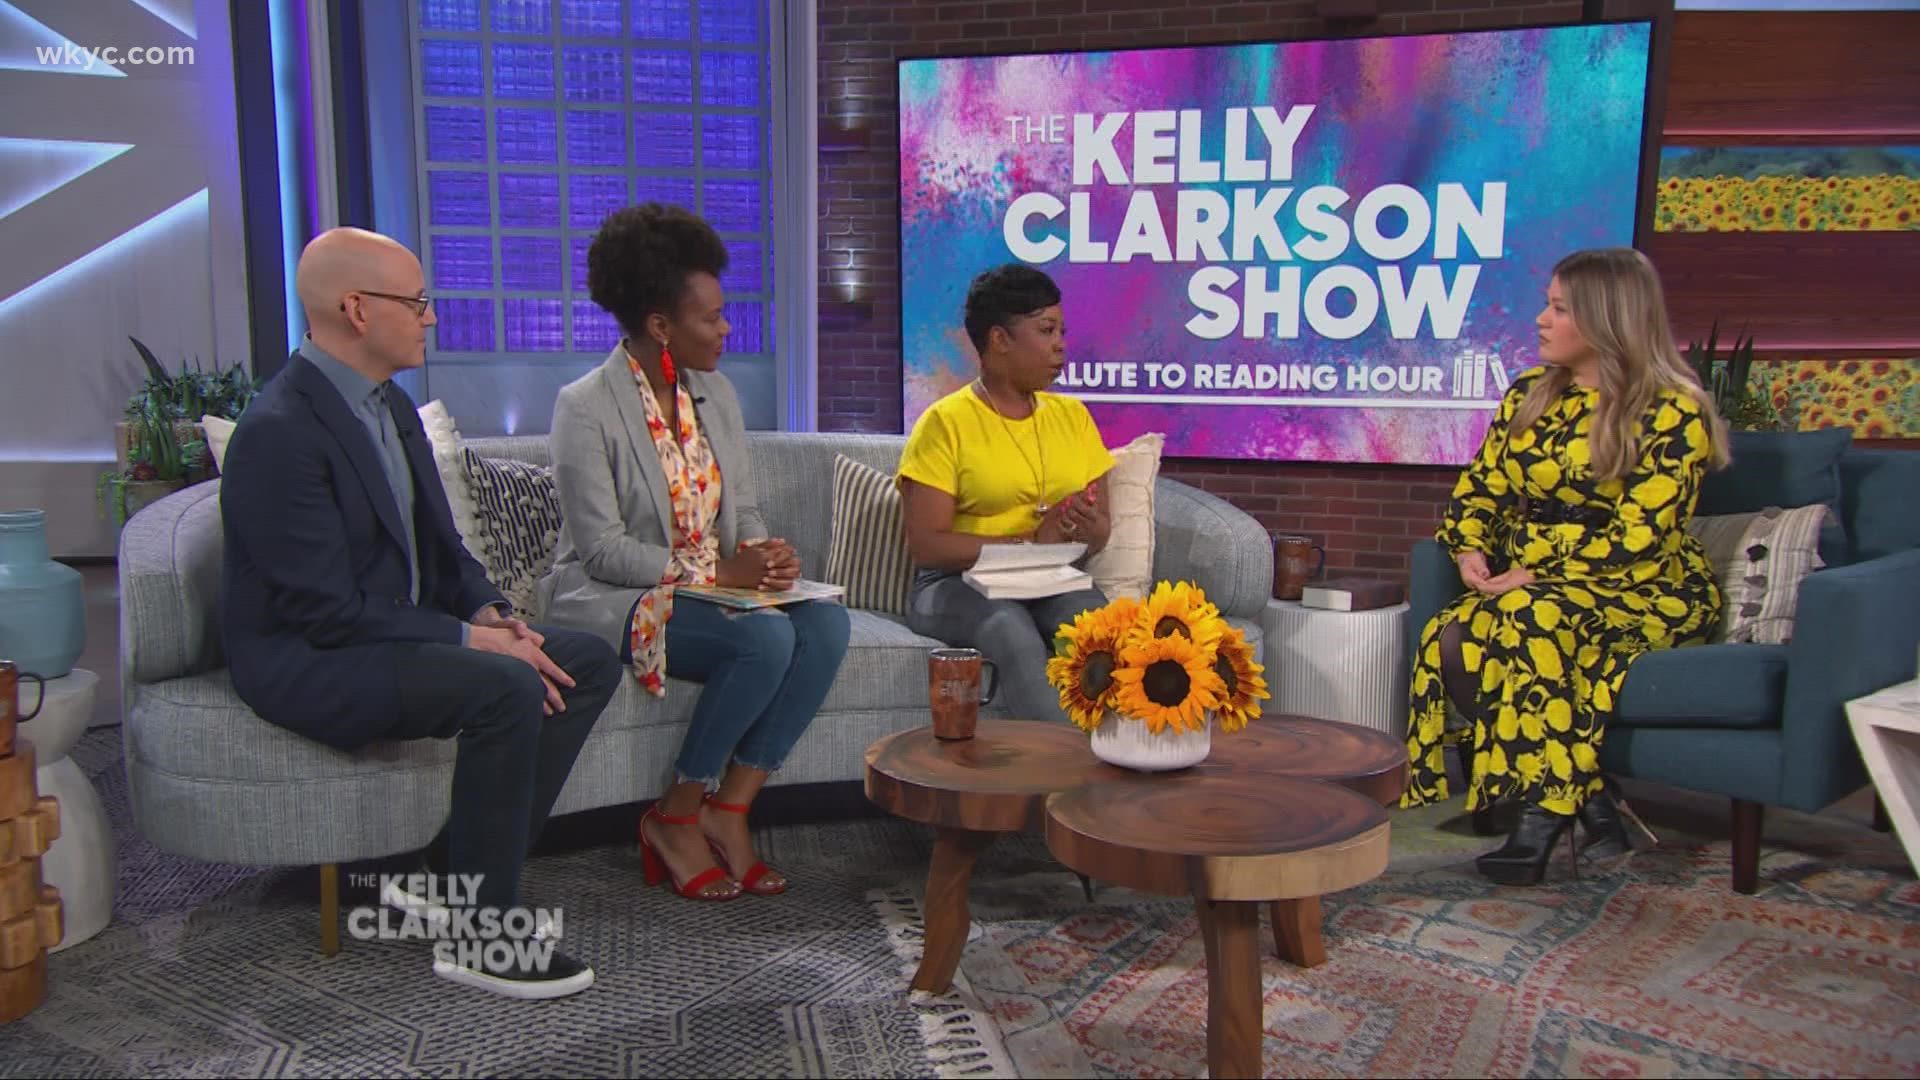 Chrishawndra Matthews of Cleveland is appearing on 'The Kelly Clarkson Show' March 2 to discuss her mission with Literacy in the H.O.O.D.